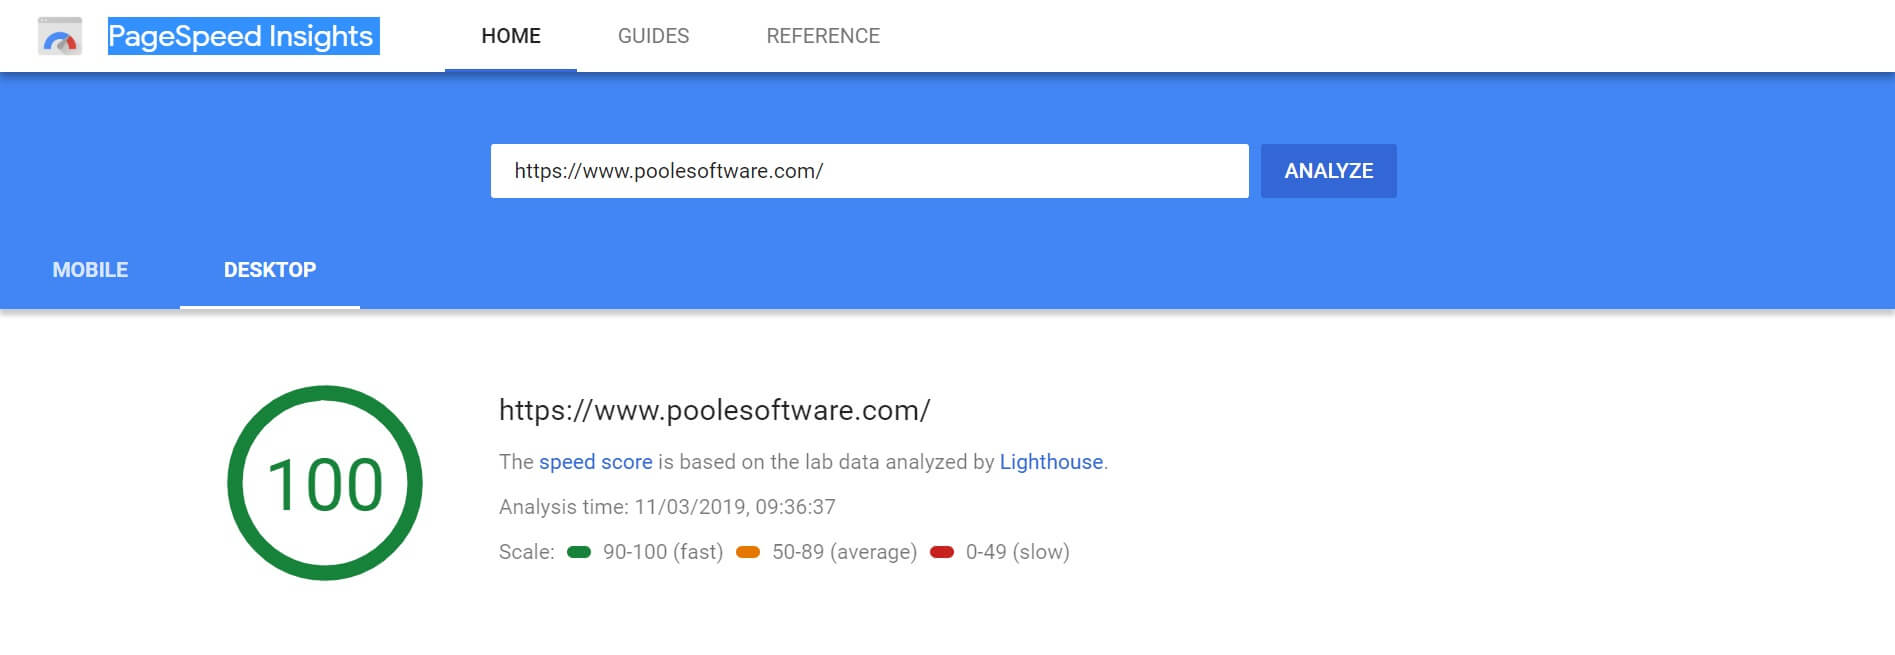 100% in the Google PageSpeed Insights Image